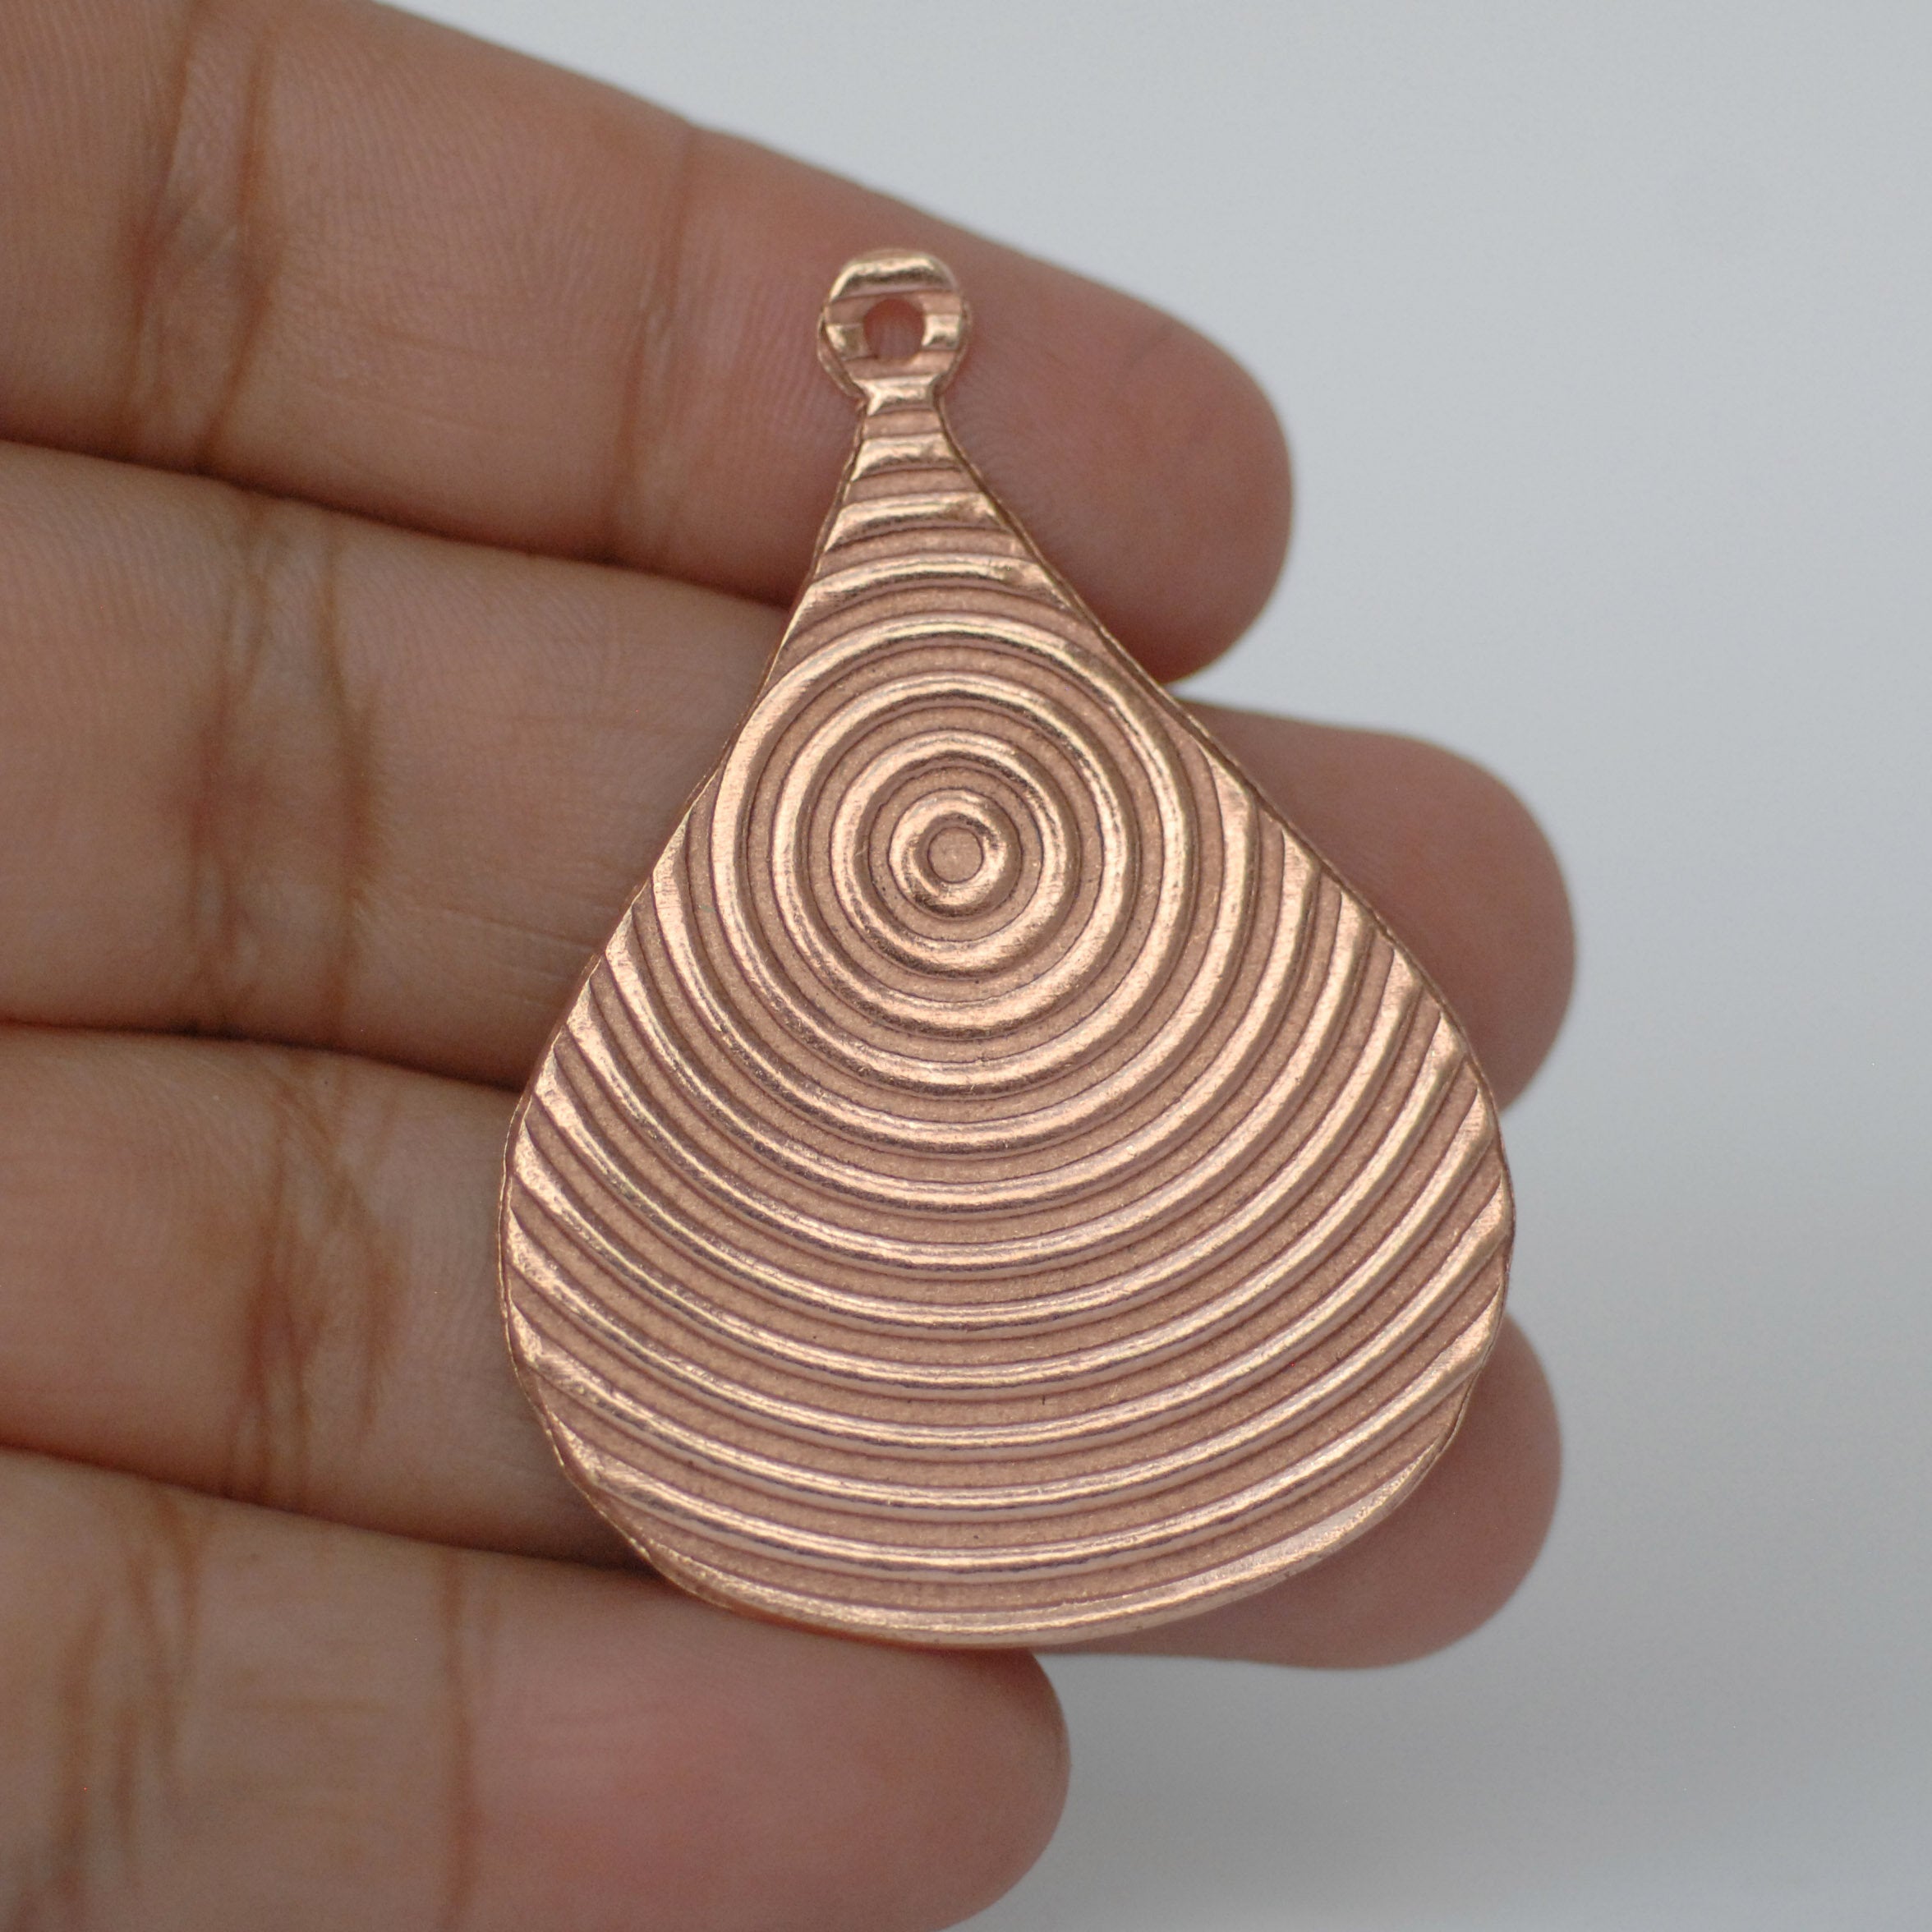 Arabic teardrop shape w/ concentric circle rising sun texture metal blanks for earrings or for pendants with holes